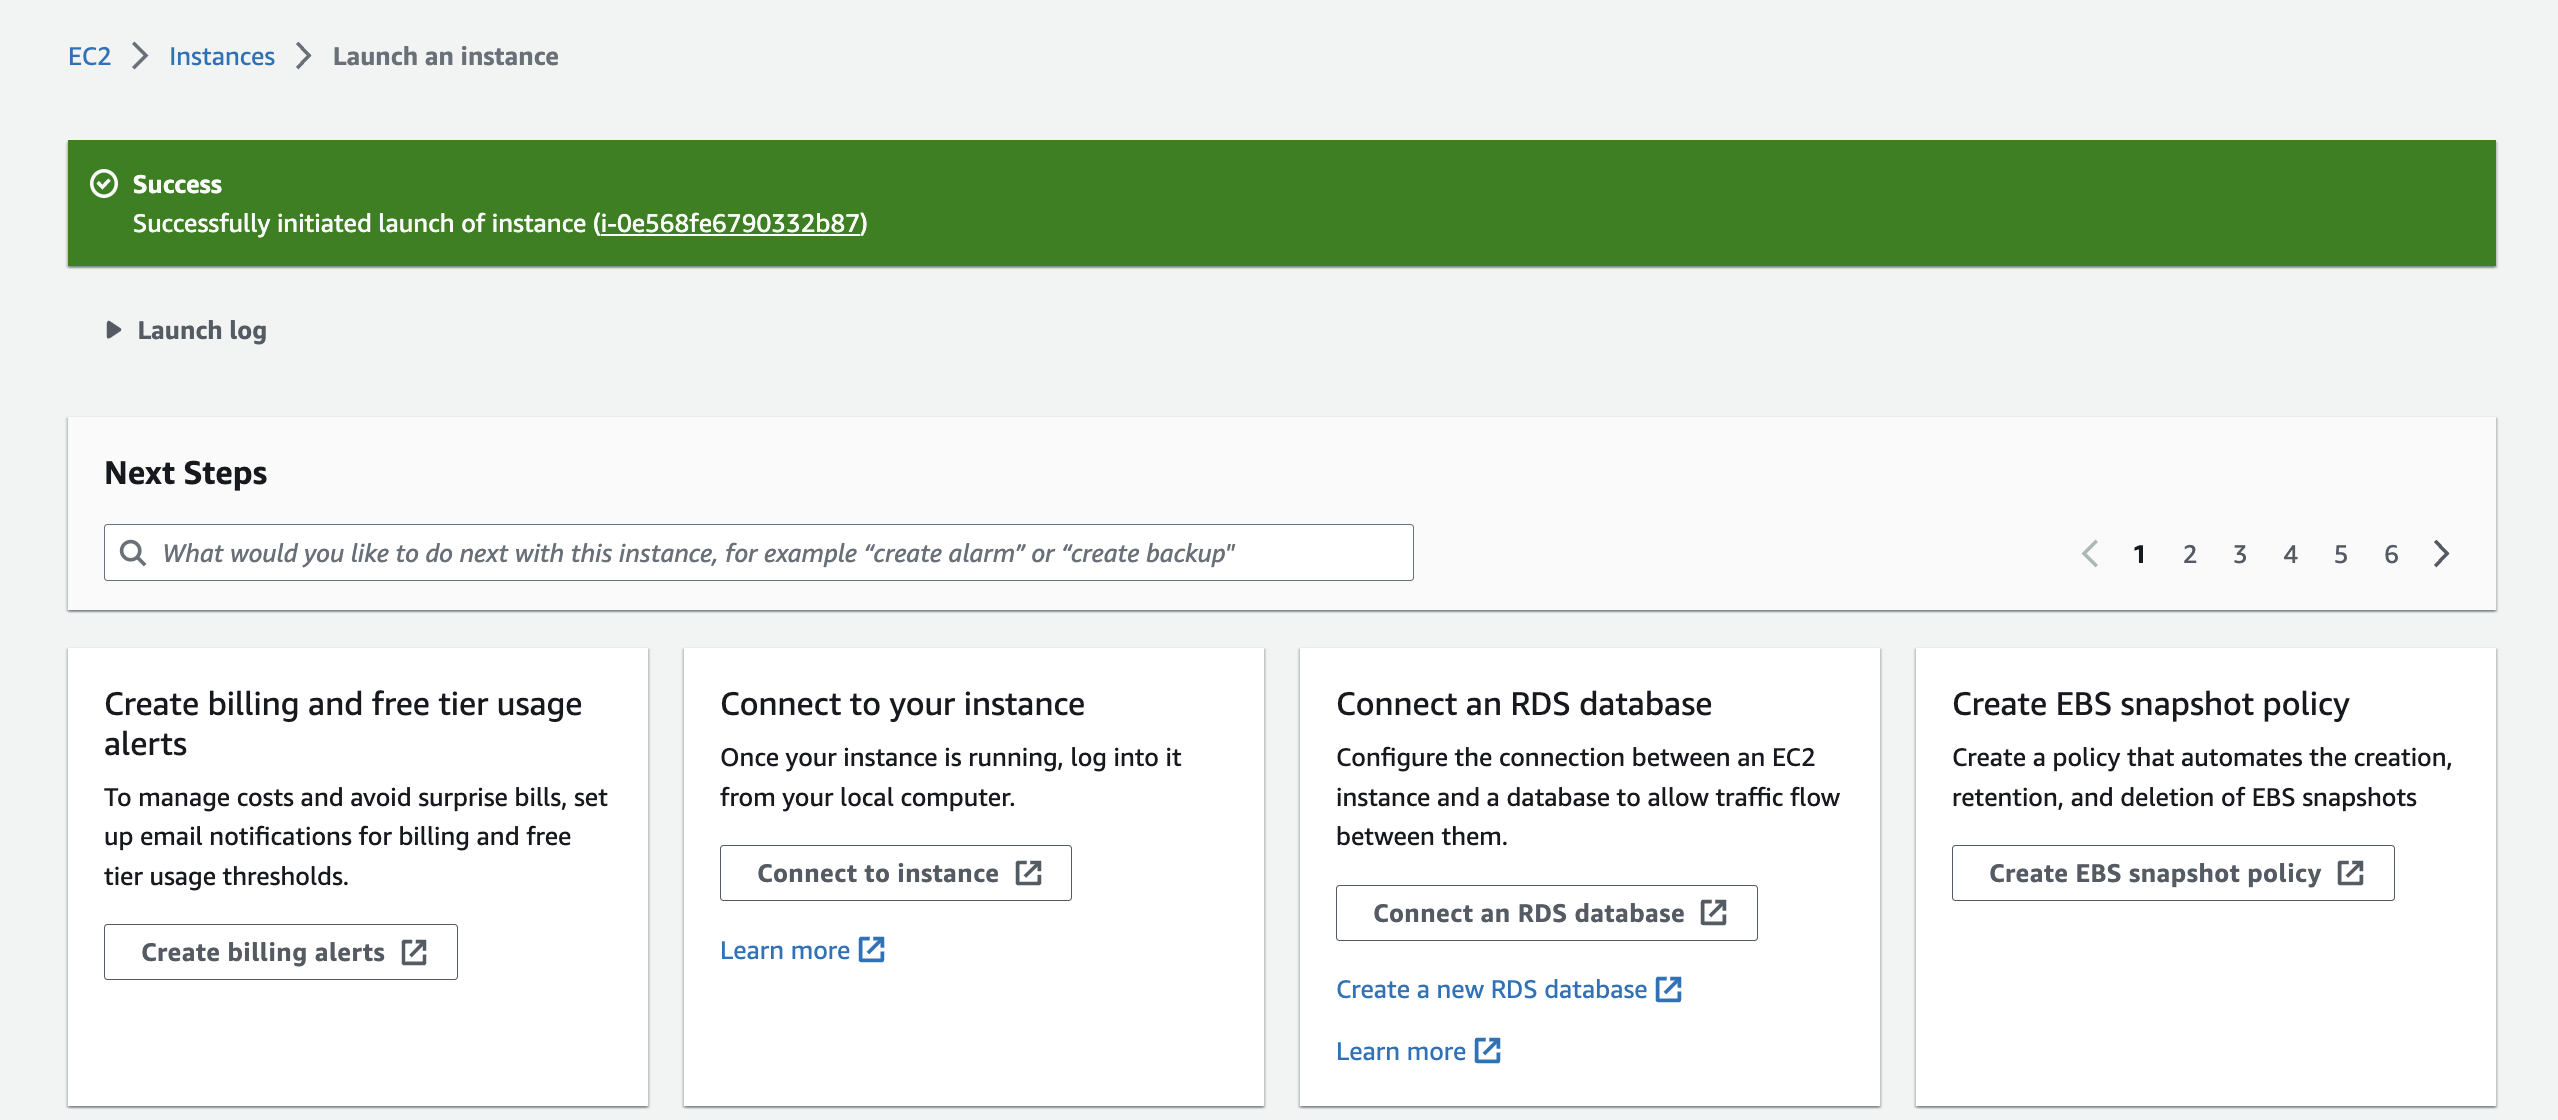 EC2 Dashboard in the AWS console with a green banner showing that the instance was launched successfully